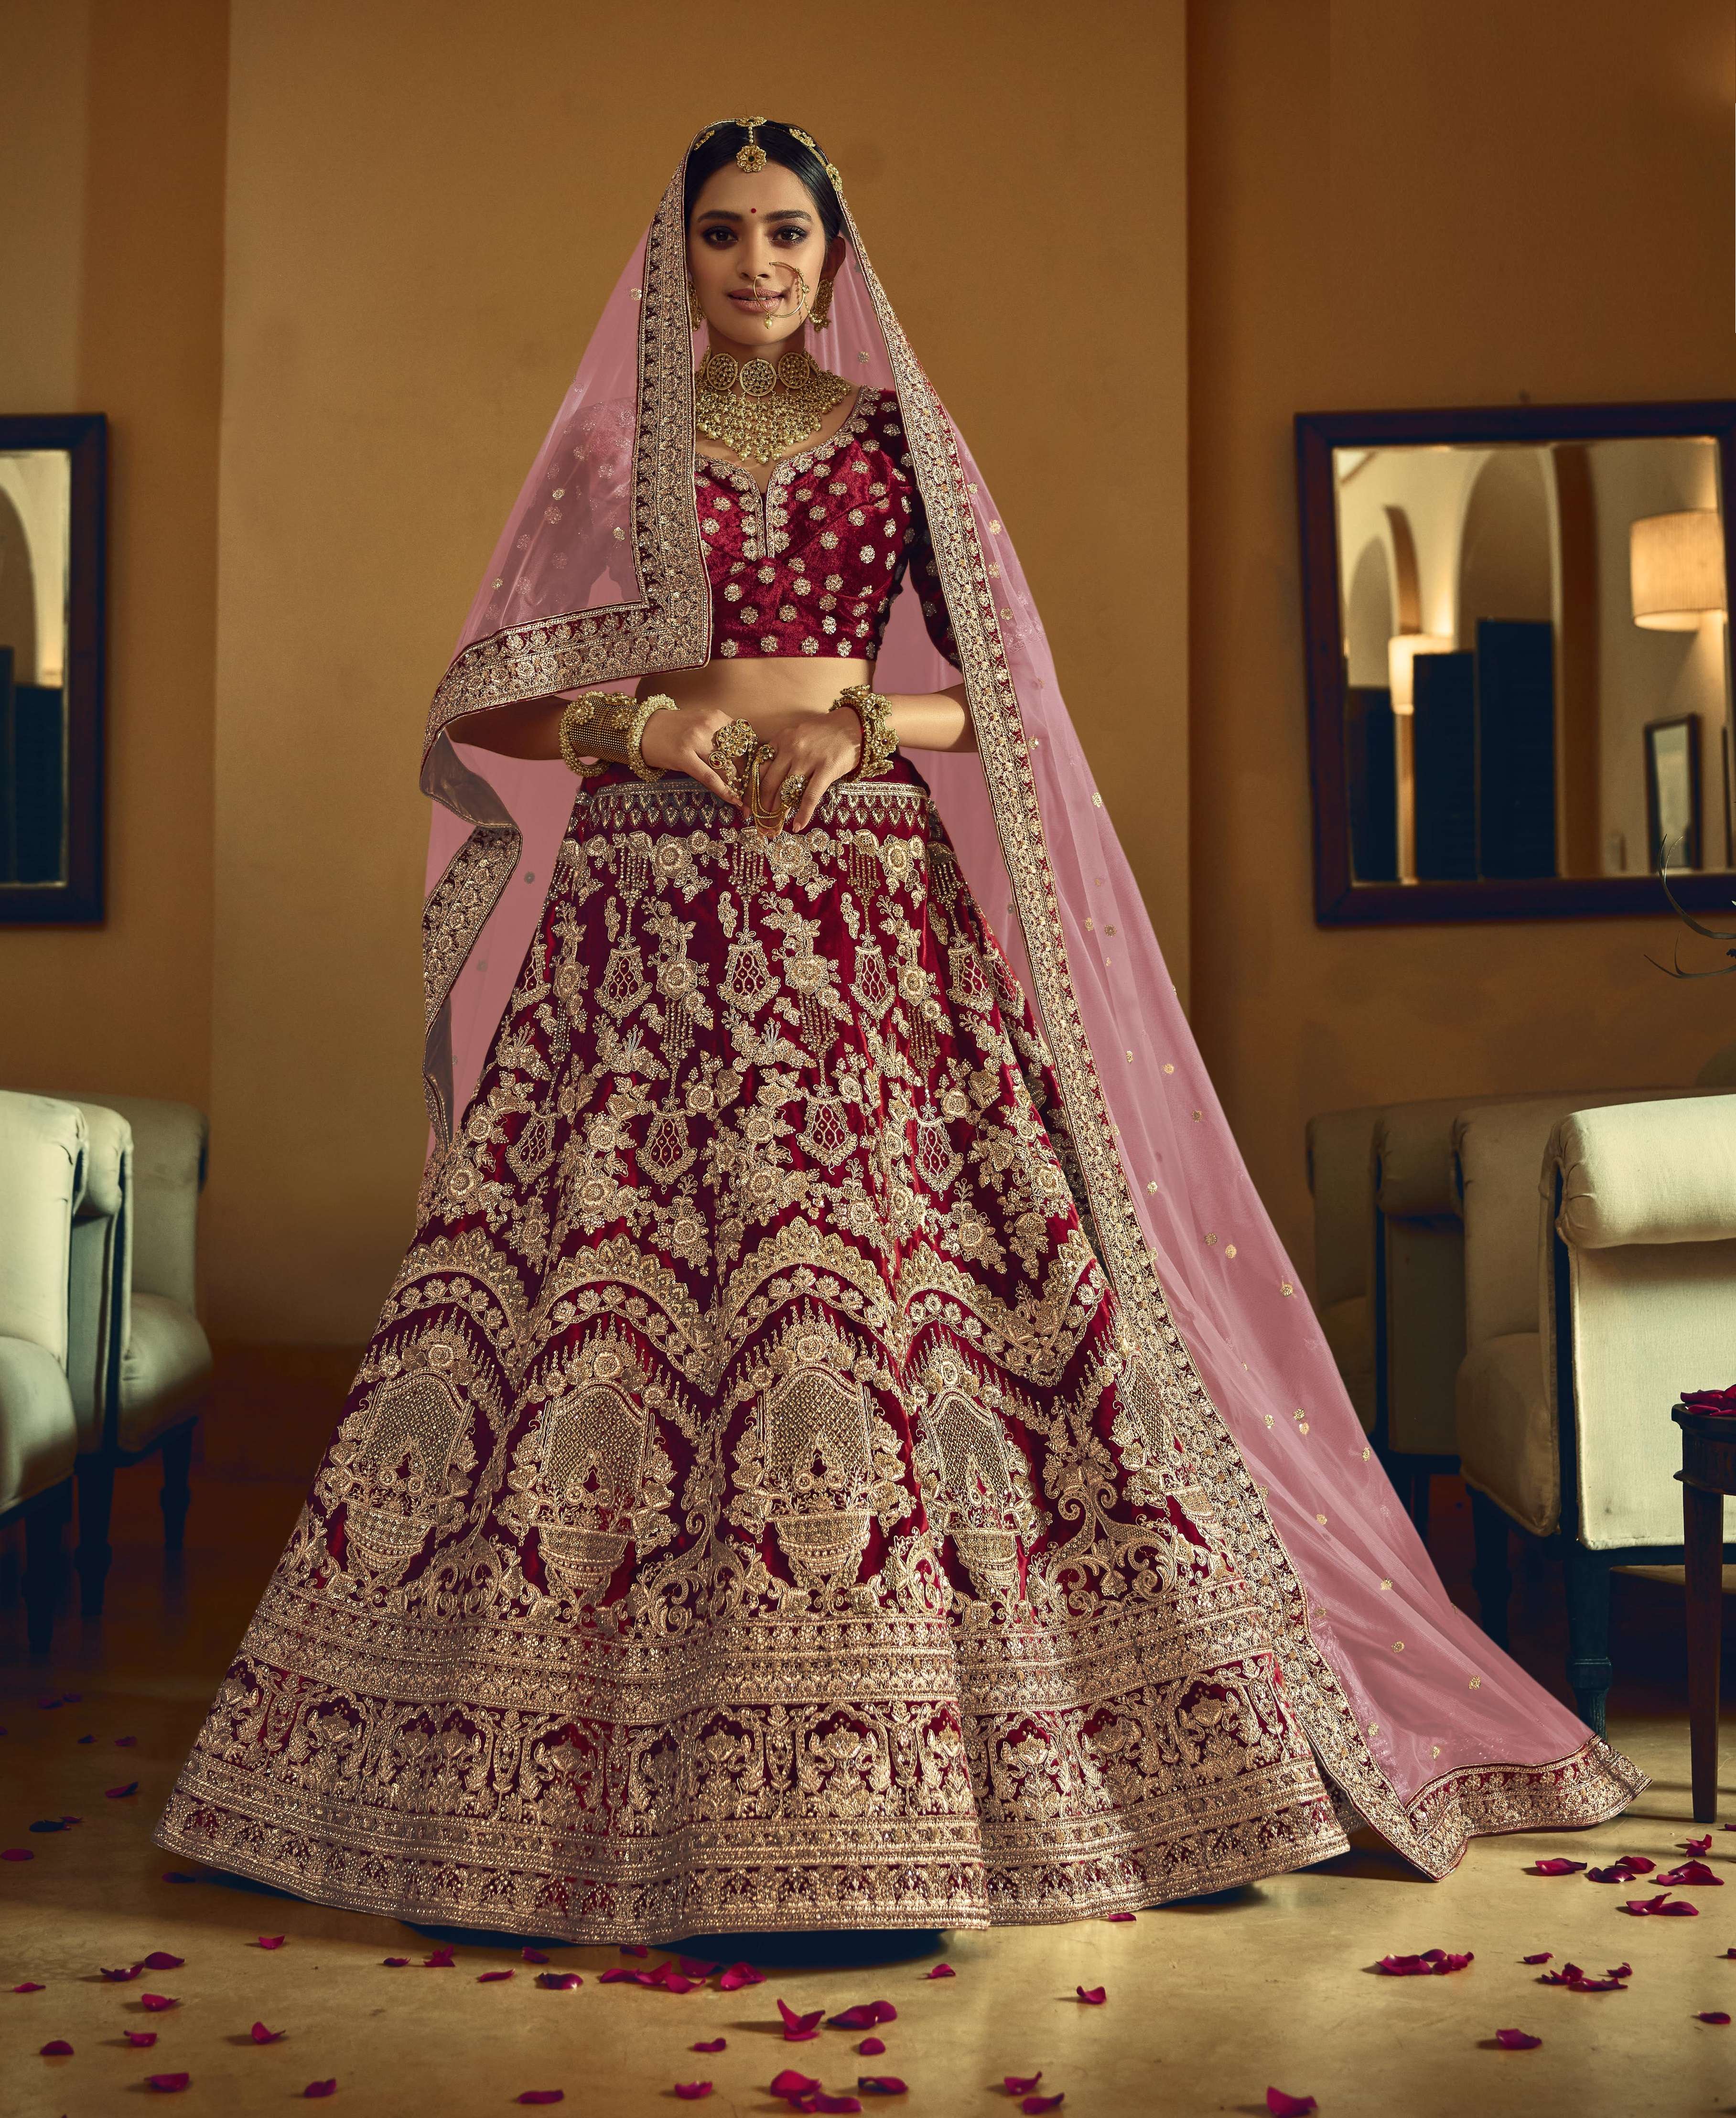 Lehenga Designs That You Can Wear On Your Wedding